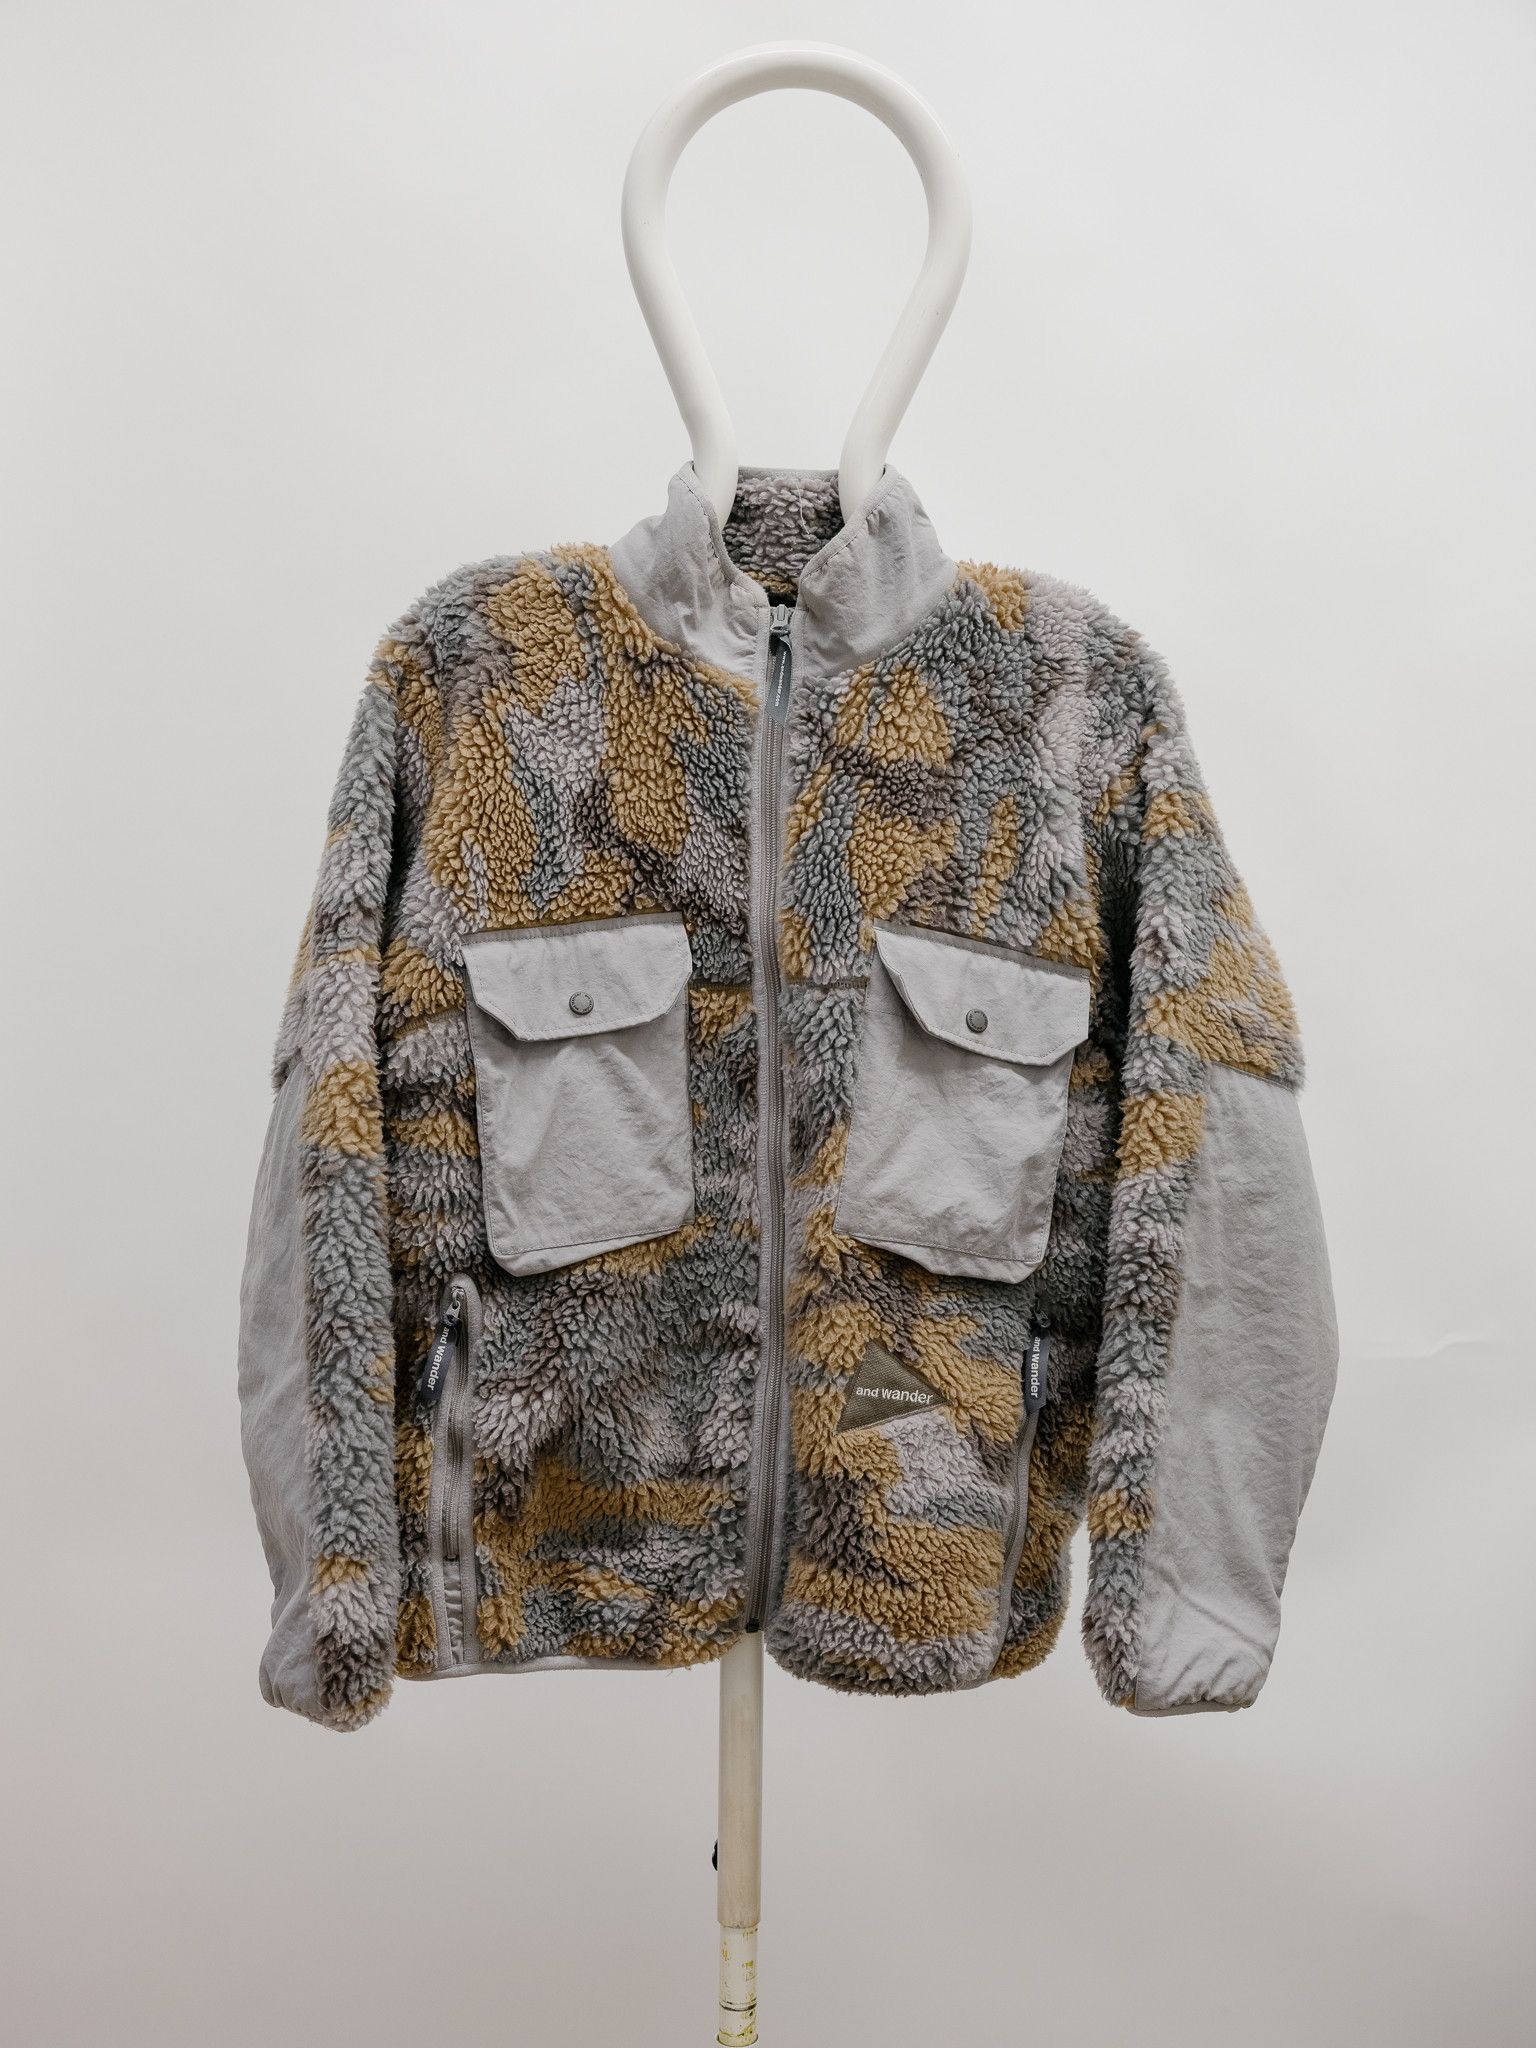 Shop and Wander Boa camouflage fleece jacket with Express Delivery